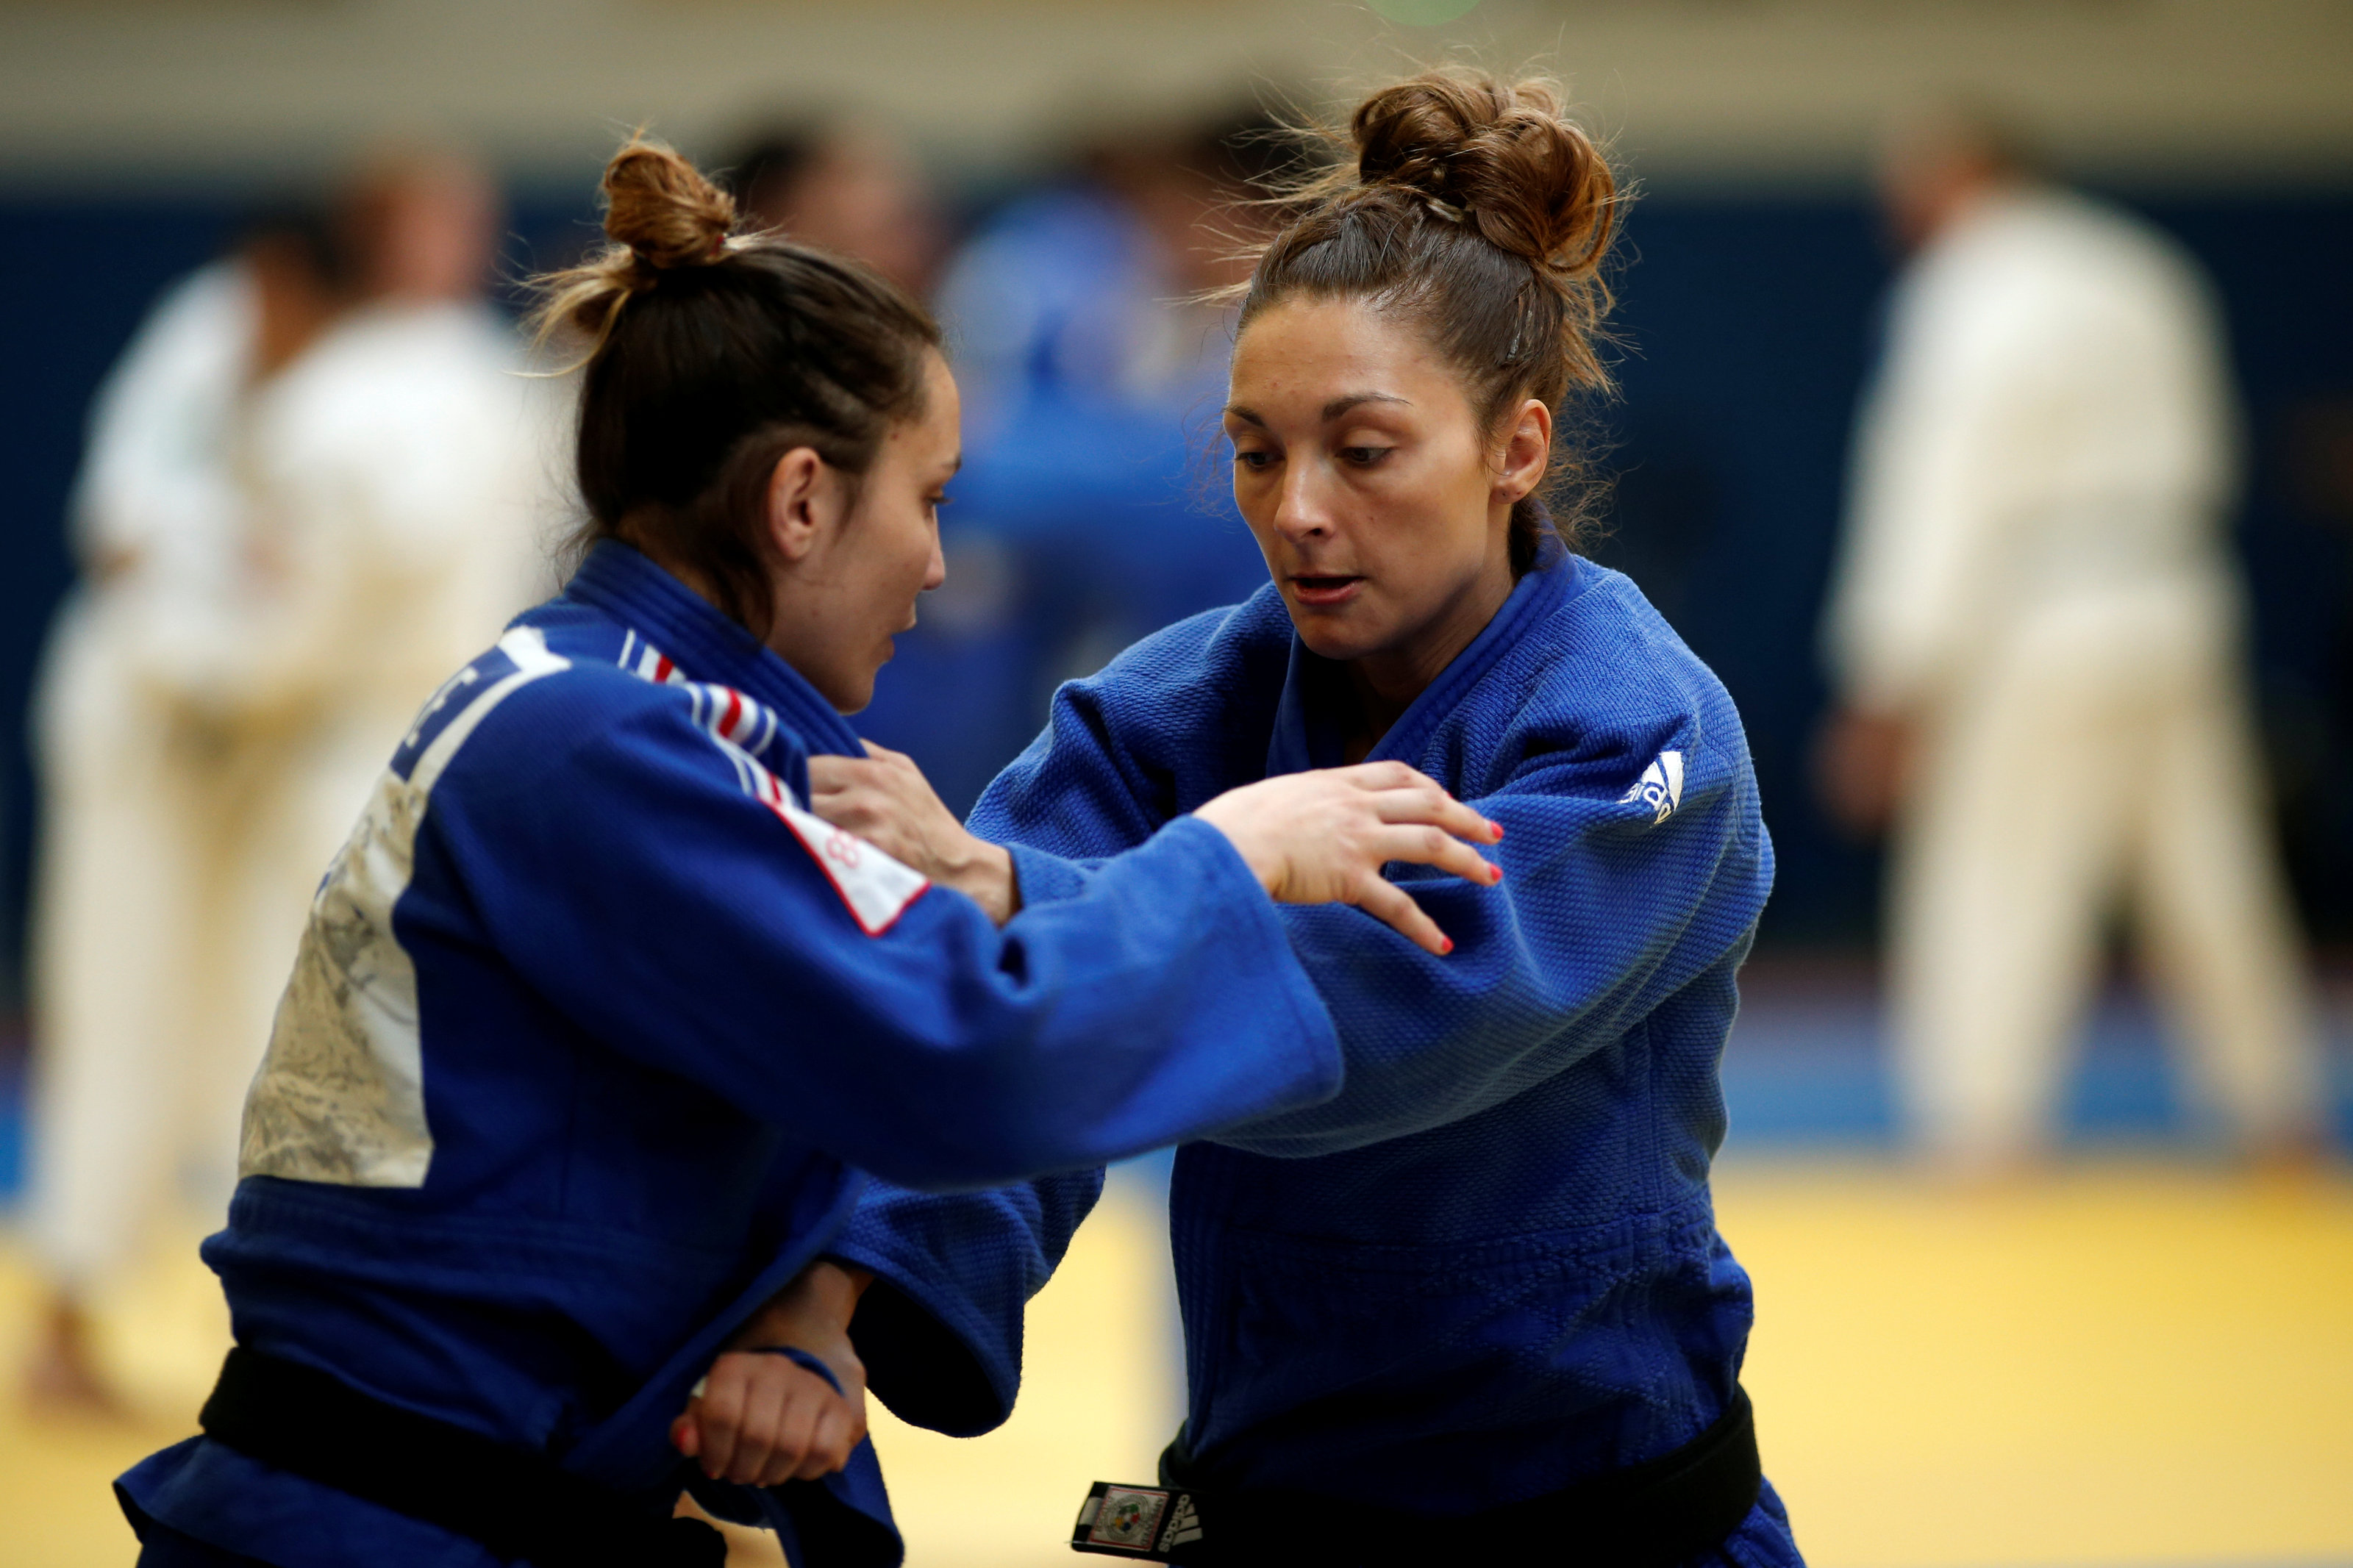 French judoka Automne Pavia takes part in a training session at the French National Institute of Sport and Physical Education (INSEP) in Paris